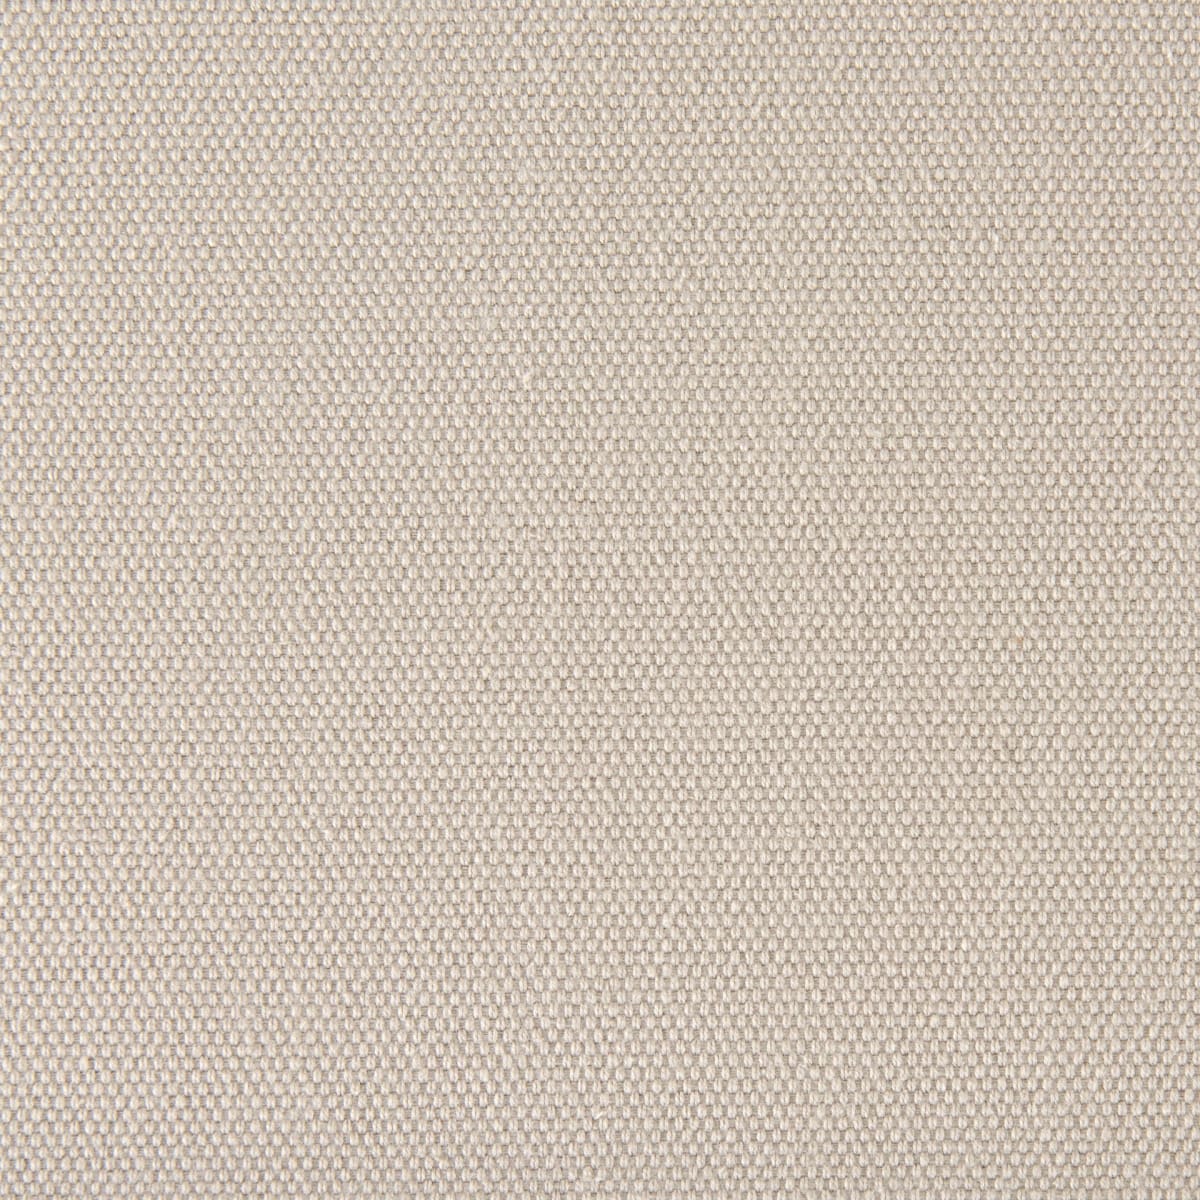 Camille Bench Cream Fabric | Antique Gold Metal - benches